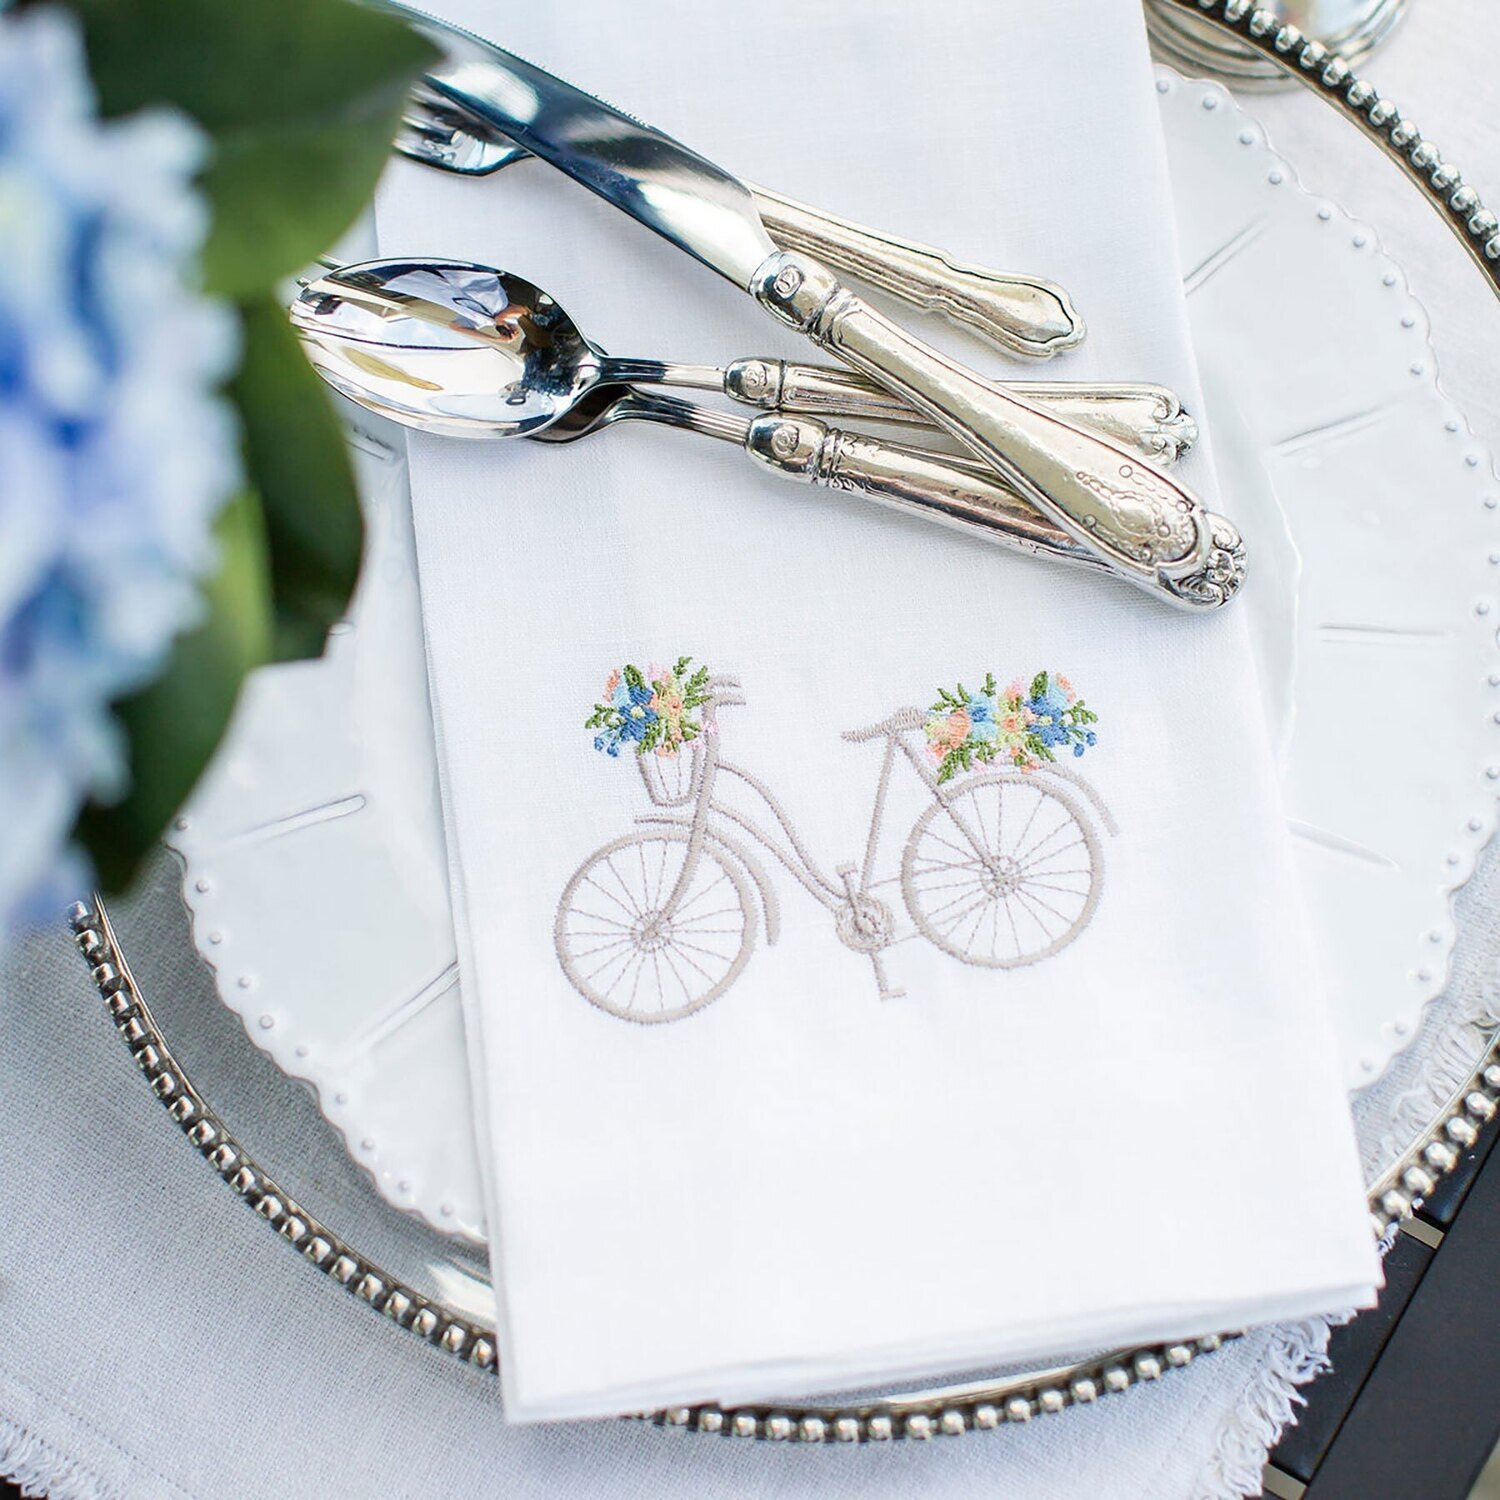 Crown Bicycle with Flowers Linen Towel White Set of 4 T1011